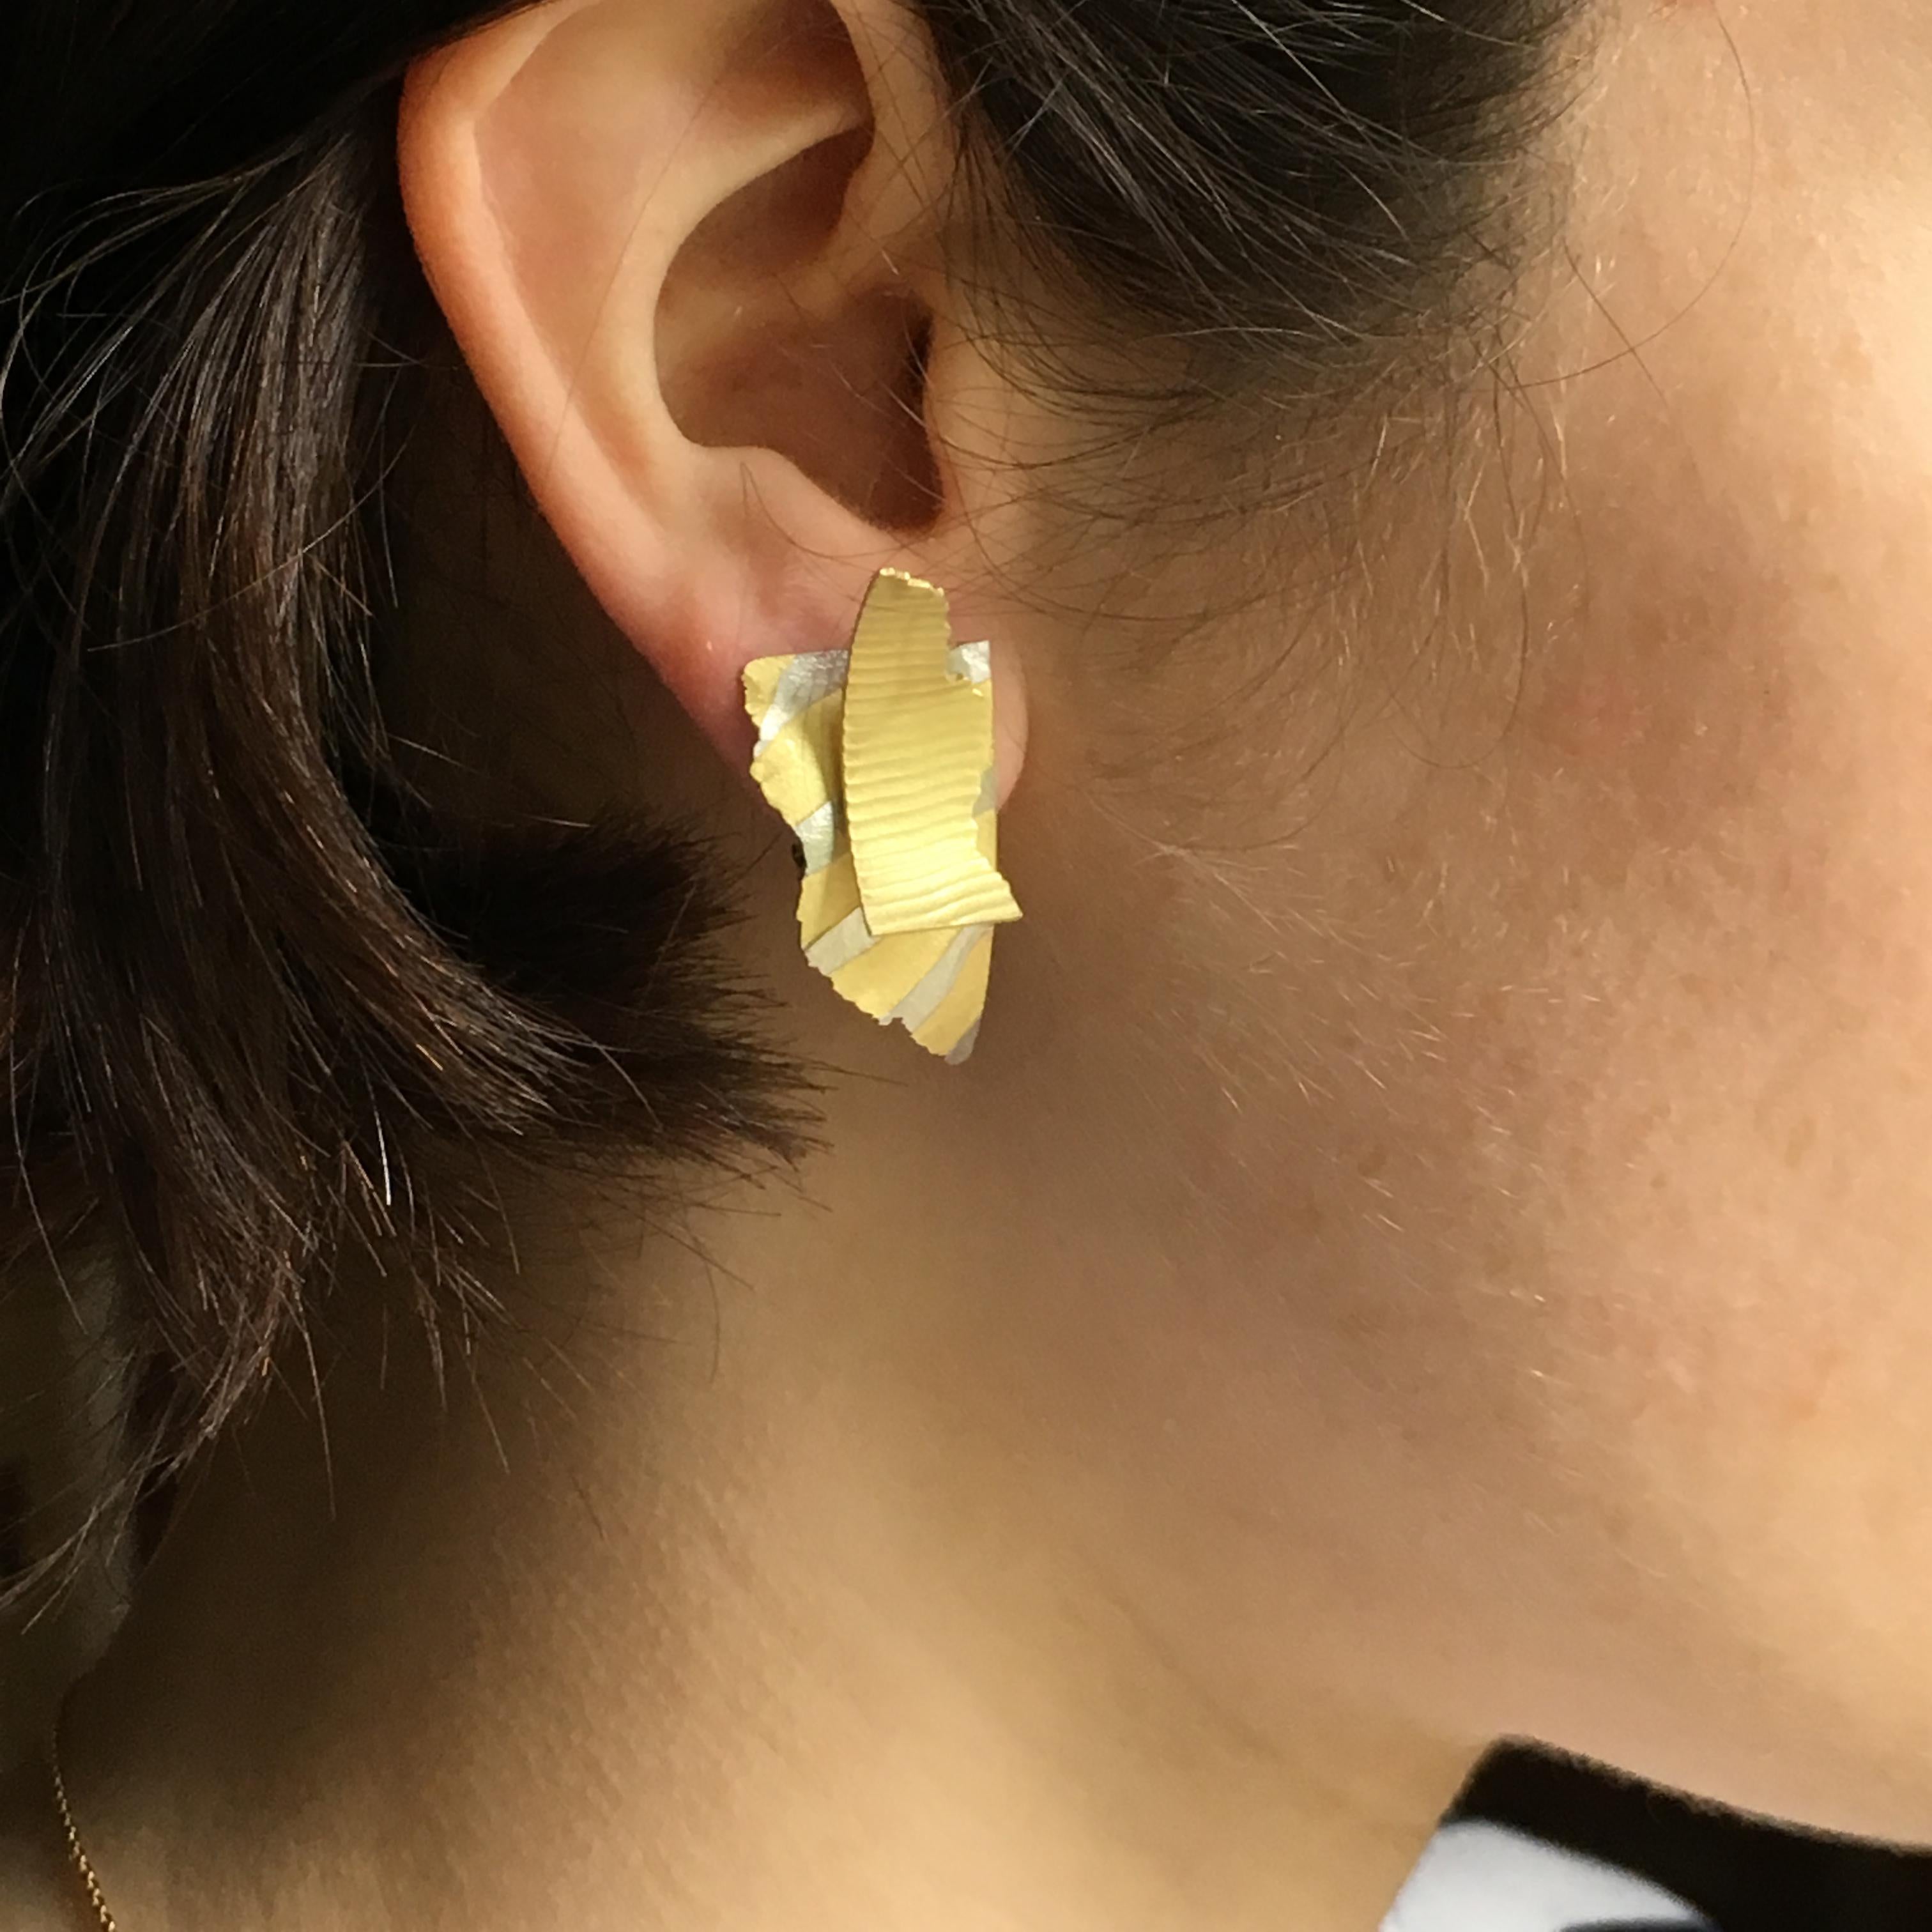 18ct yellow gold Cuttings earrings with a fused platinum inlay, impressed textures, and contrasting torn and straight edges. They resemble precious fragments placed one on top of the other as on a designer's mood board. The fittings are posts and